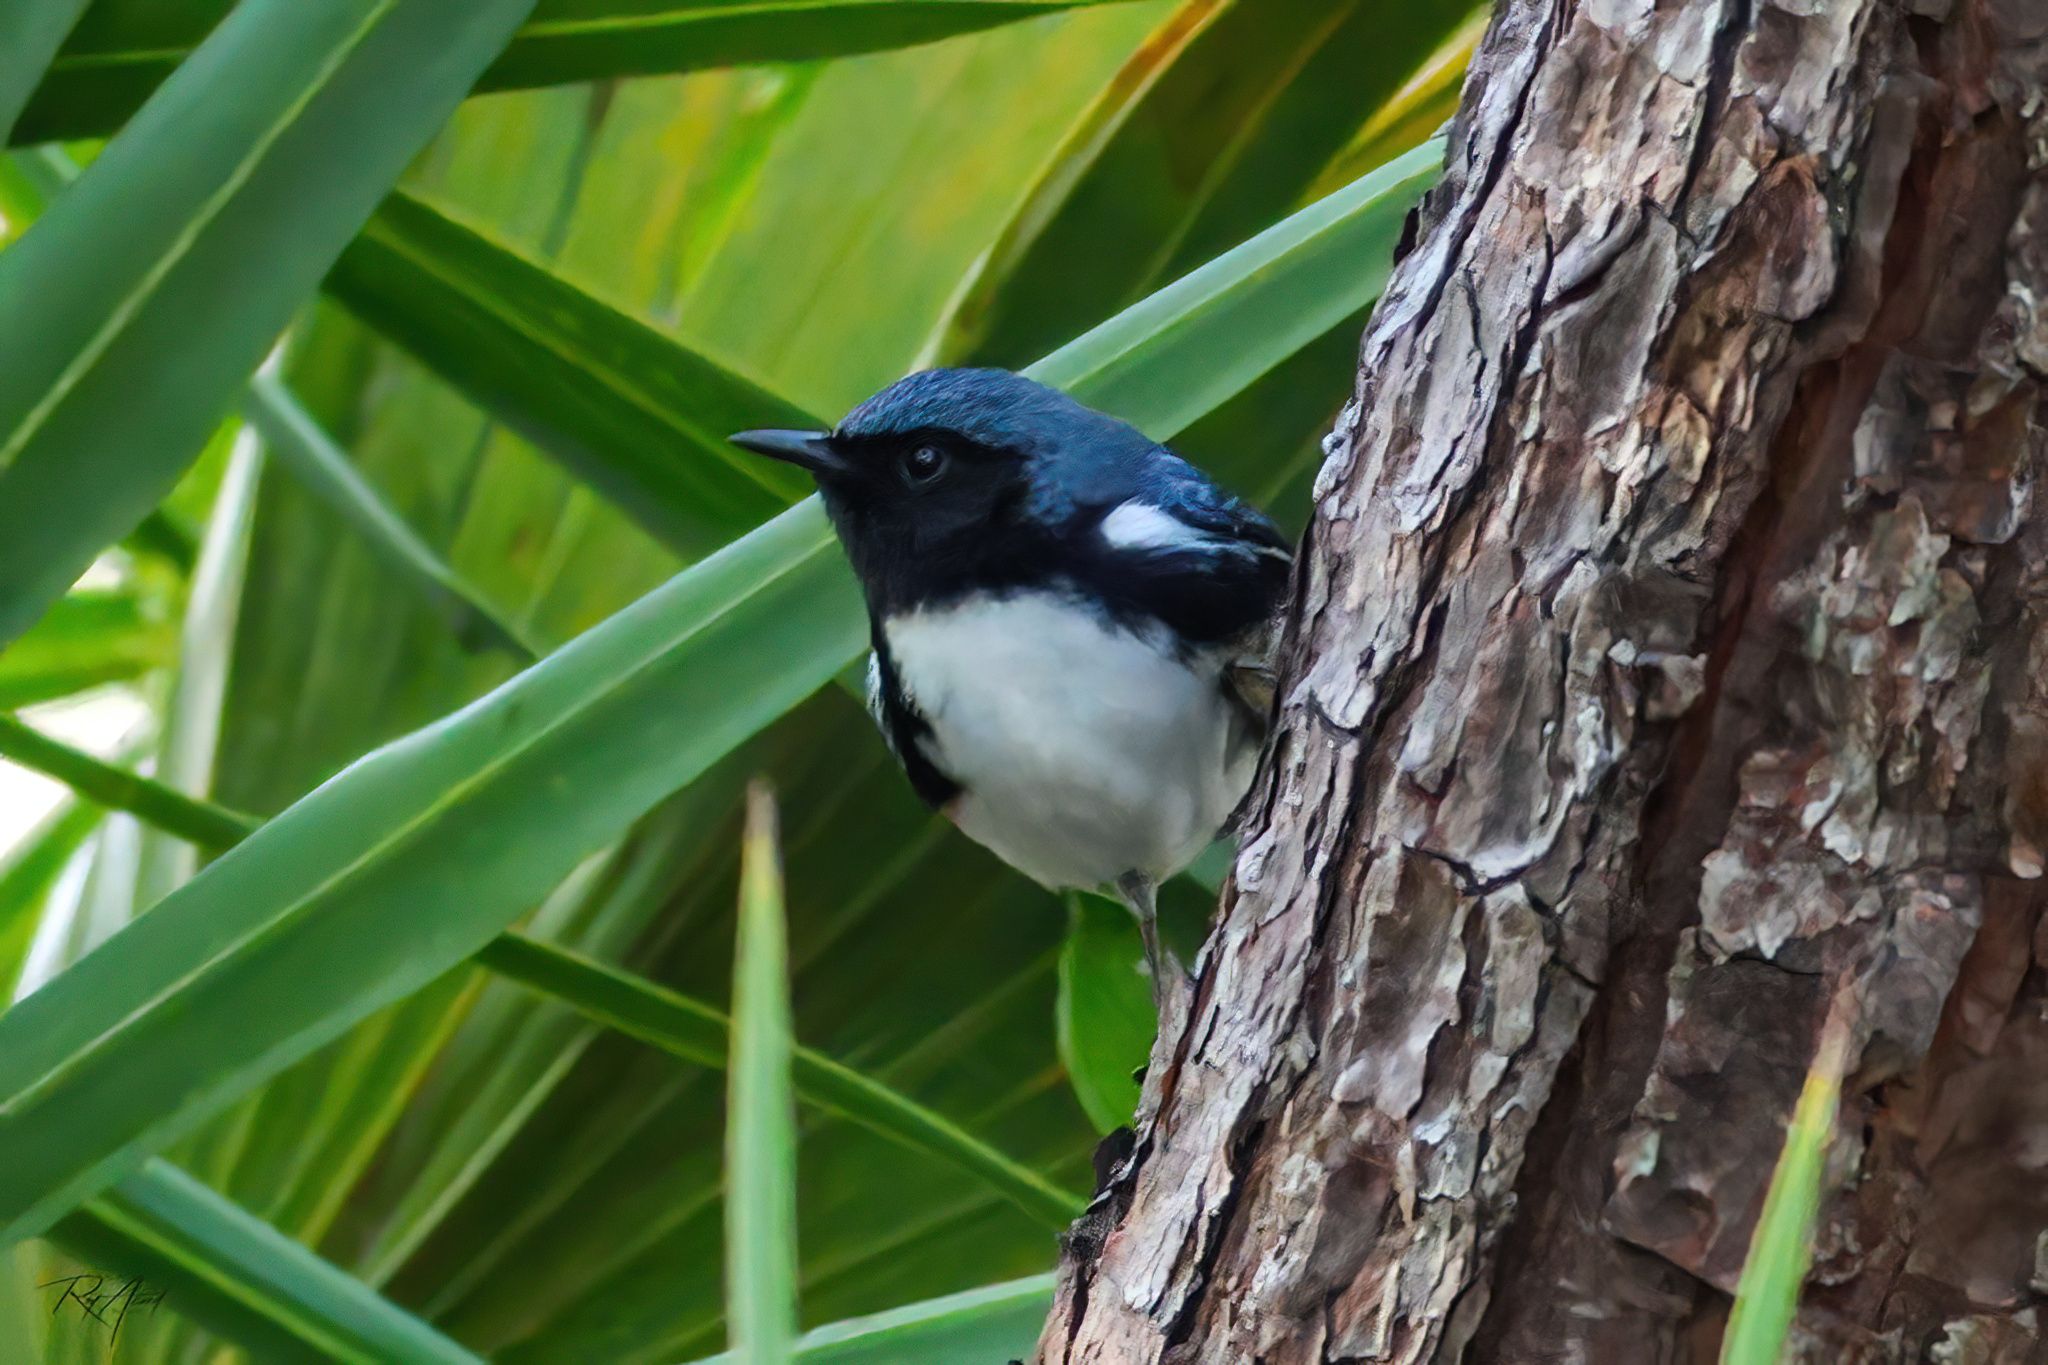 Male Black-throated Blue Warbler by Roy Acord on YouPic